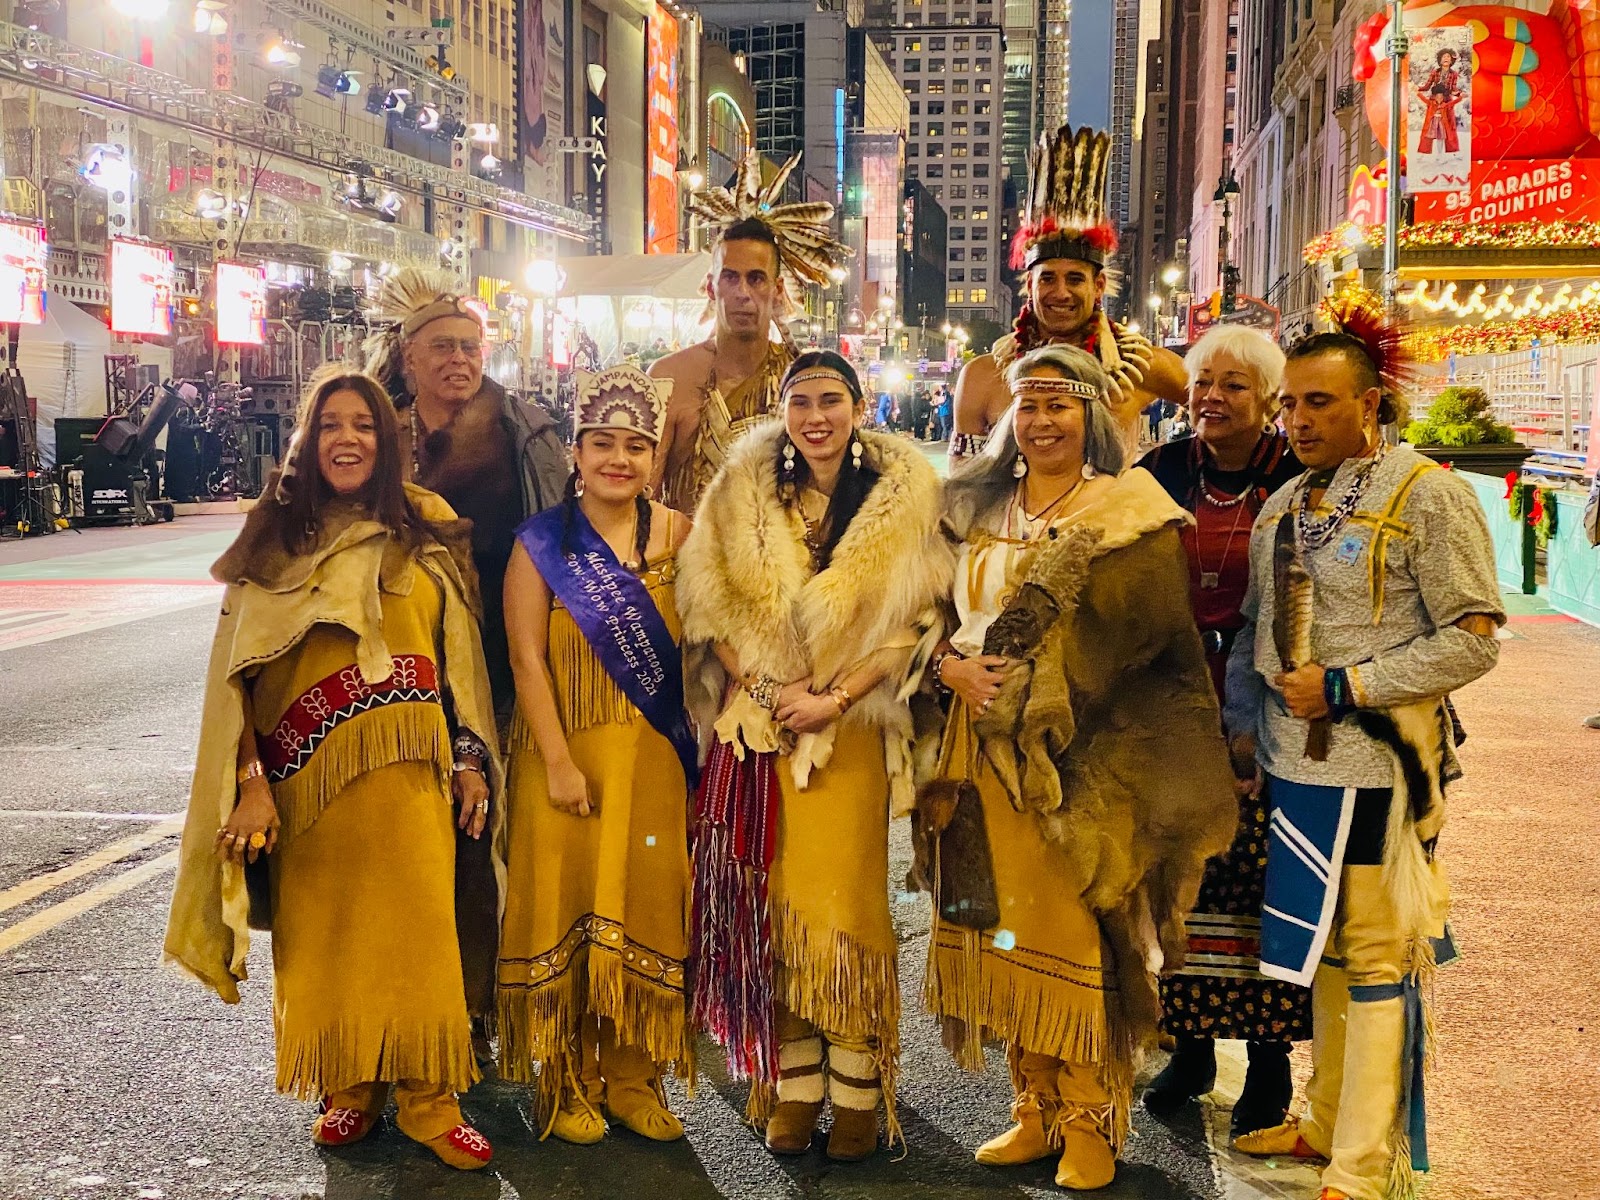 Representing in Macy’s Thanksgiving Day Parade: Wampanoag Elders Provide a Blessing and Land Acknowledgement